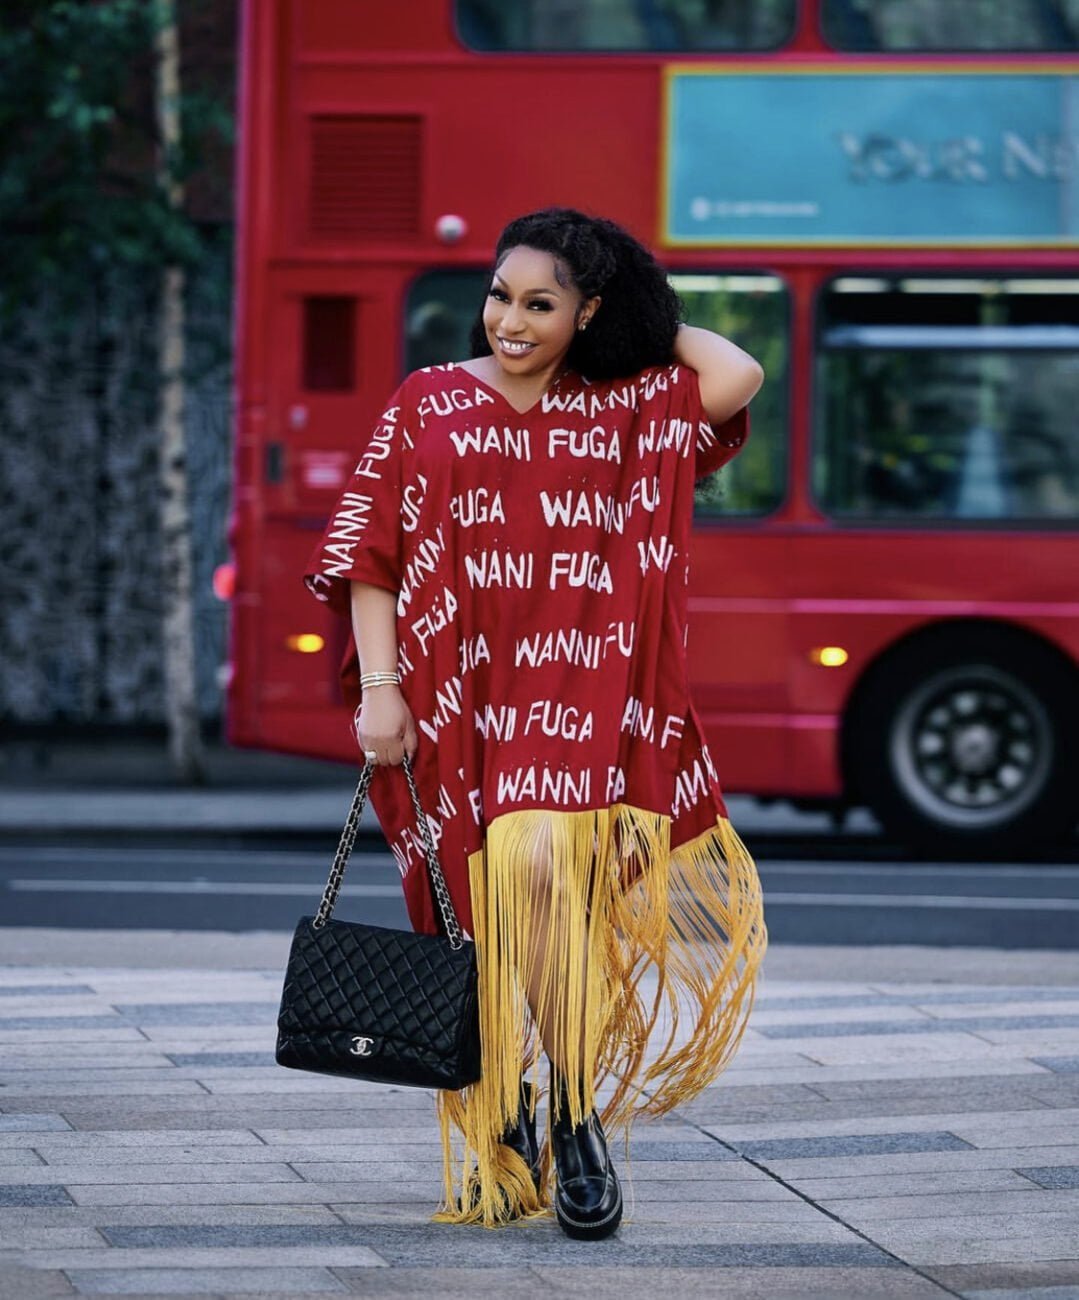 Rita Dominic reinventing the 'bubu' dress trend with acute and fashion-forward design.